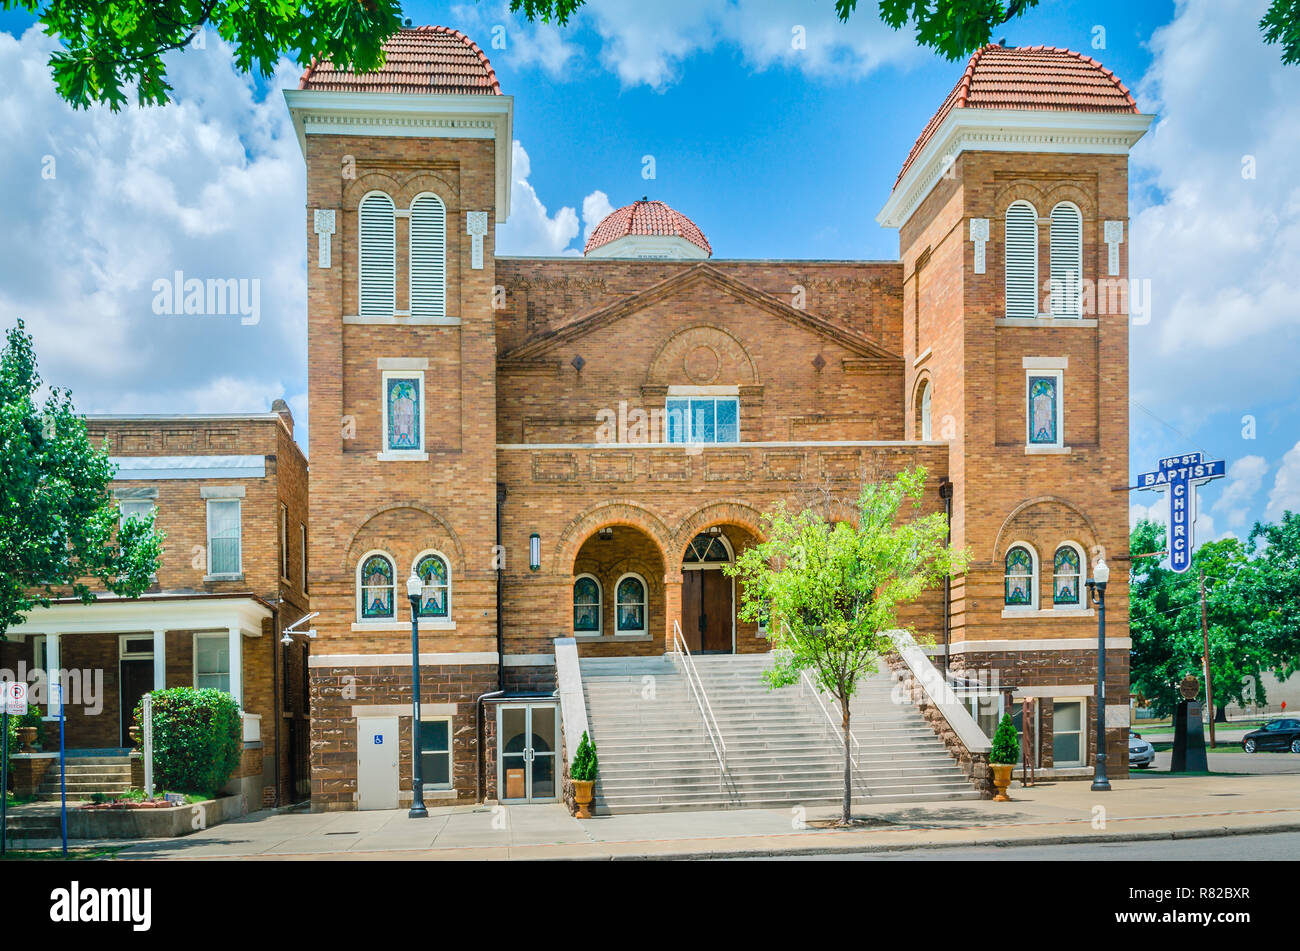 Birmingham’s 16th St. Baptist Church is pictured, July 12, 2015, in Birmingham, Alabama. The historic African-American church took a central role in t Stock Photo